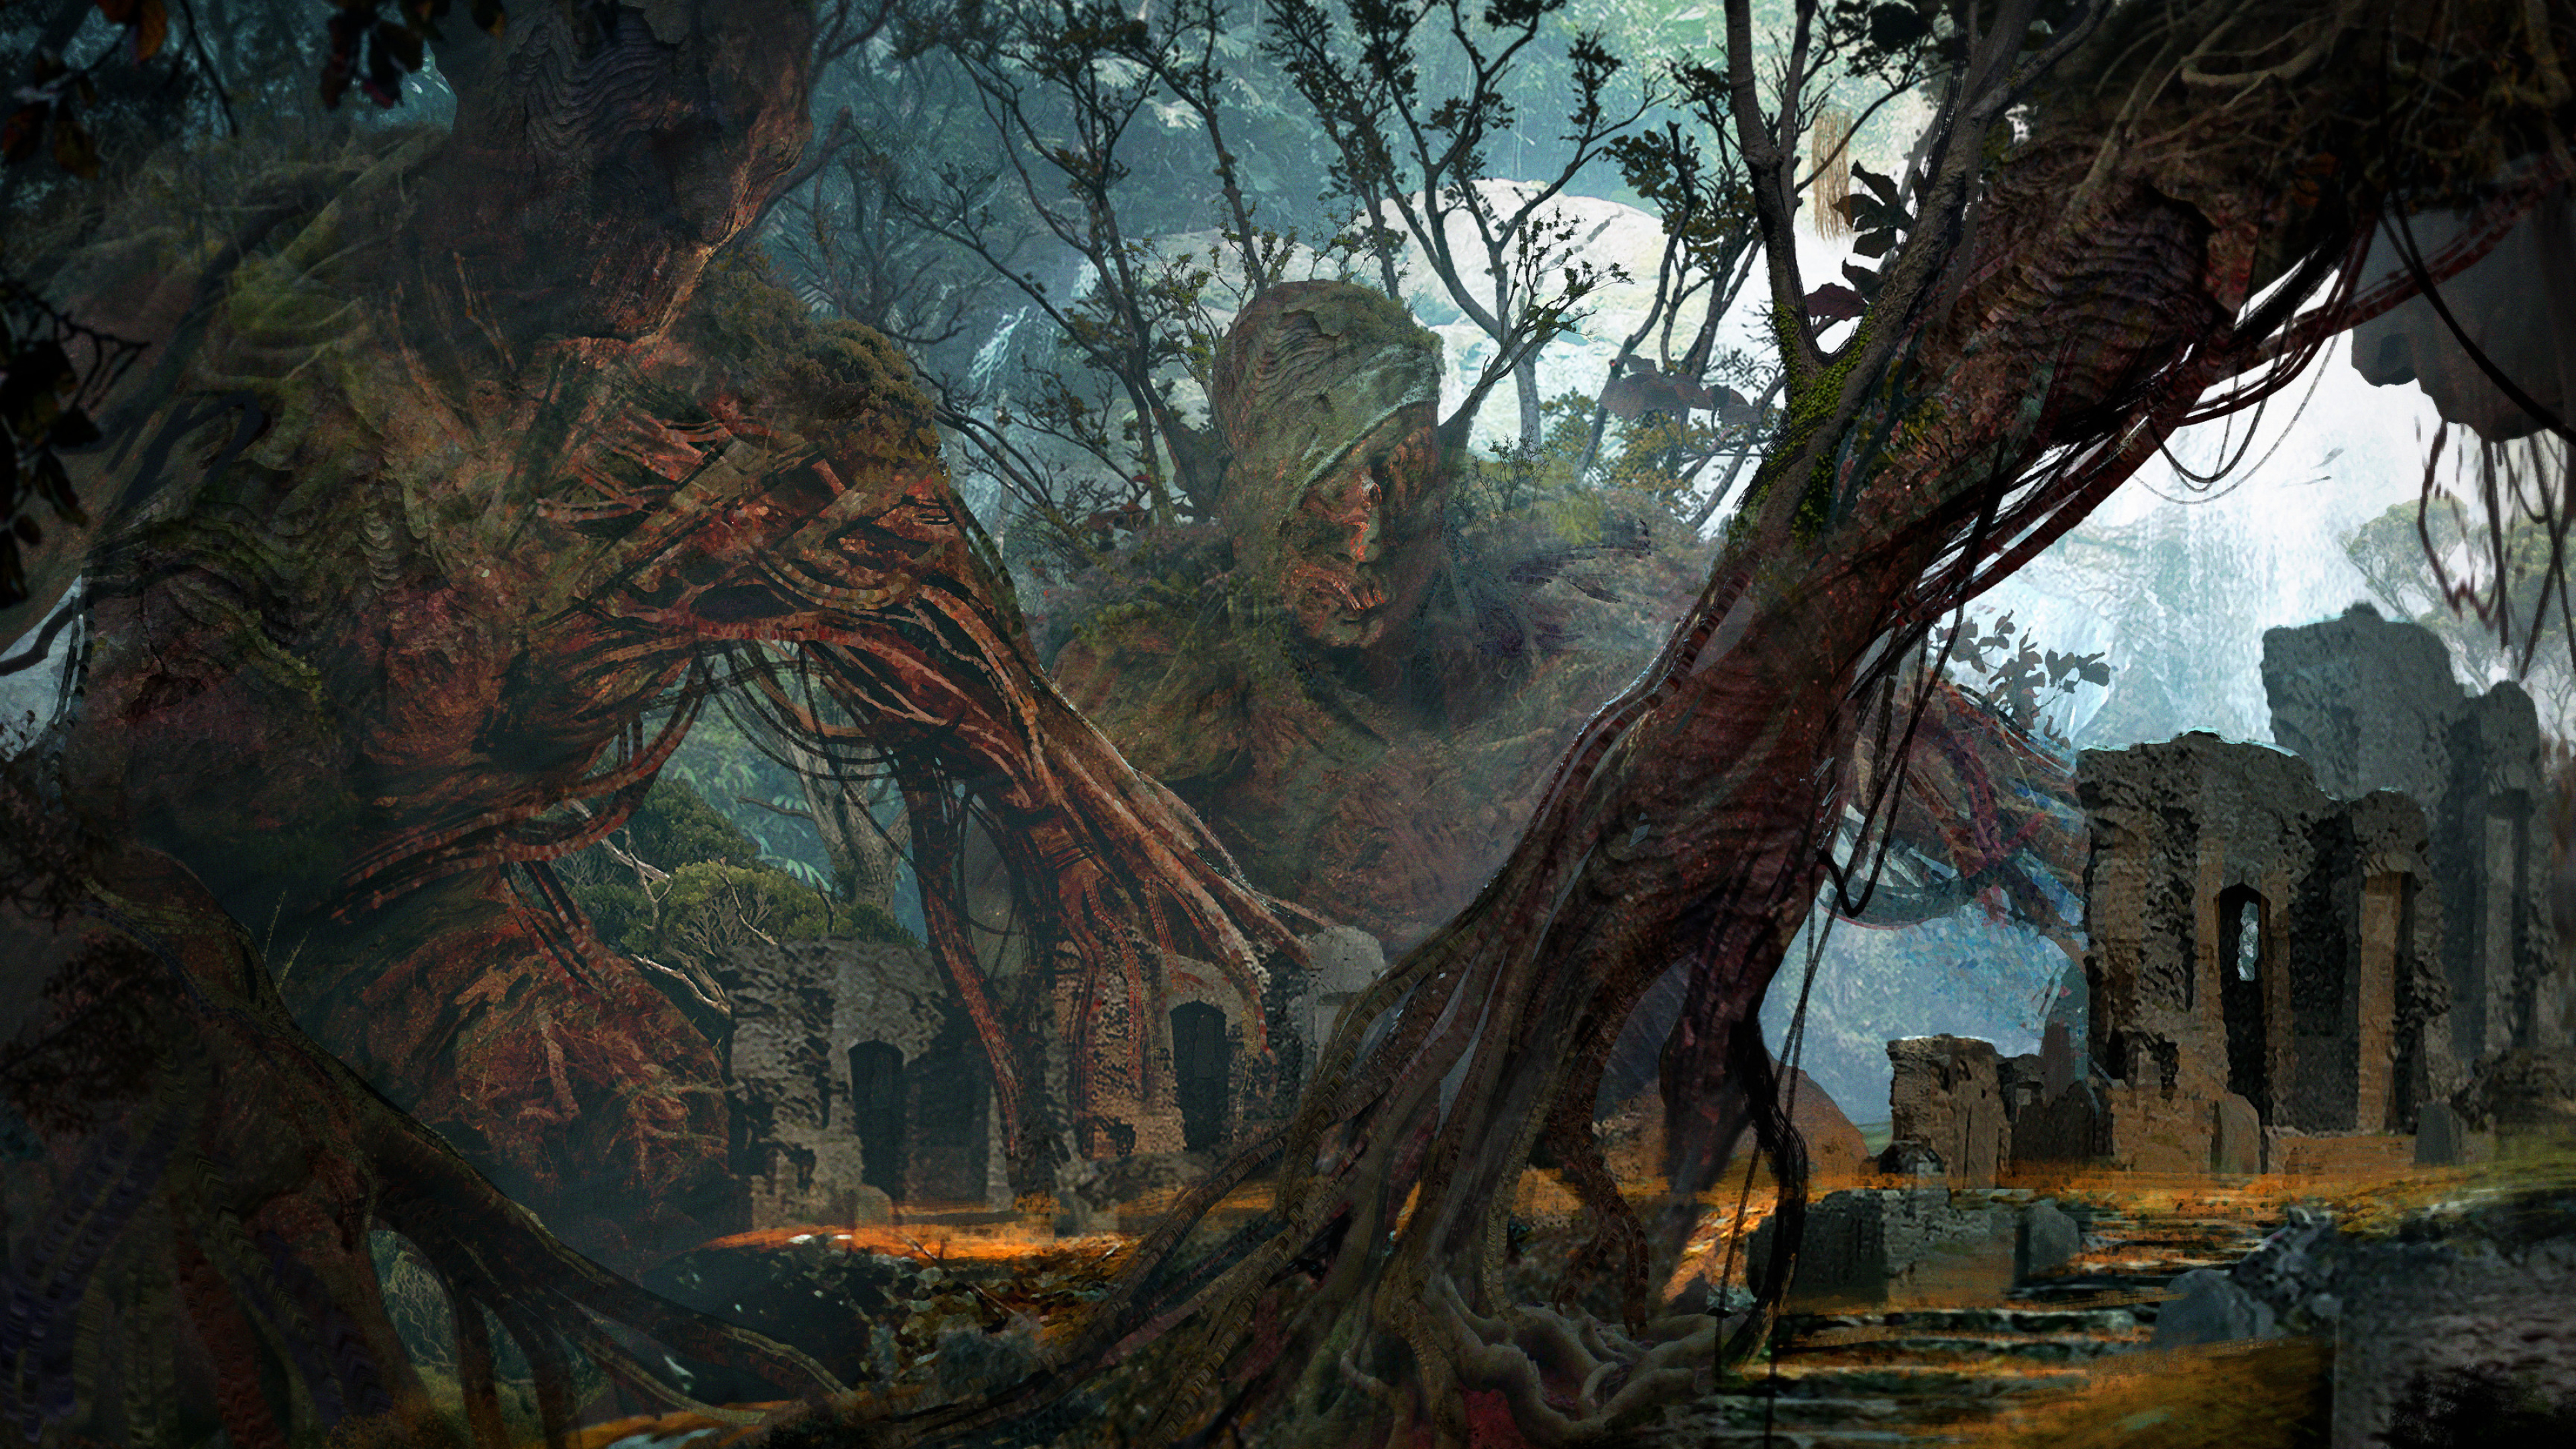 Mirkwood, Deleted by user, Imaginary bodyscapes, Ethereal art, 3840x2160 4K Desktop